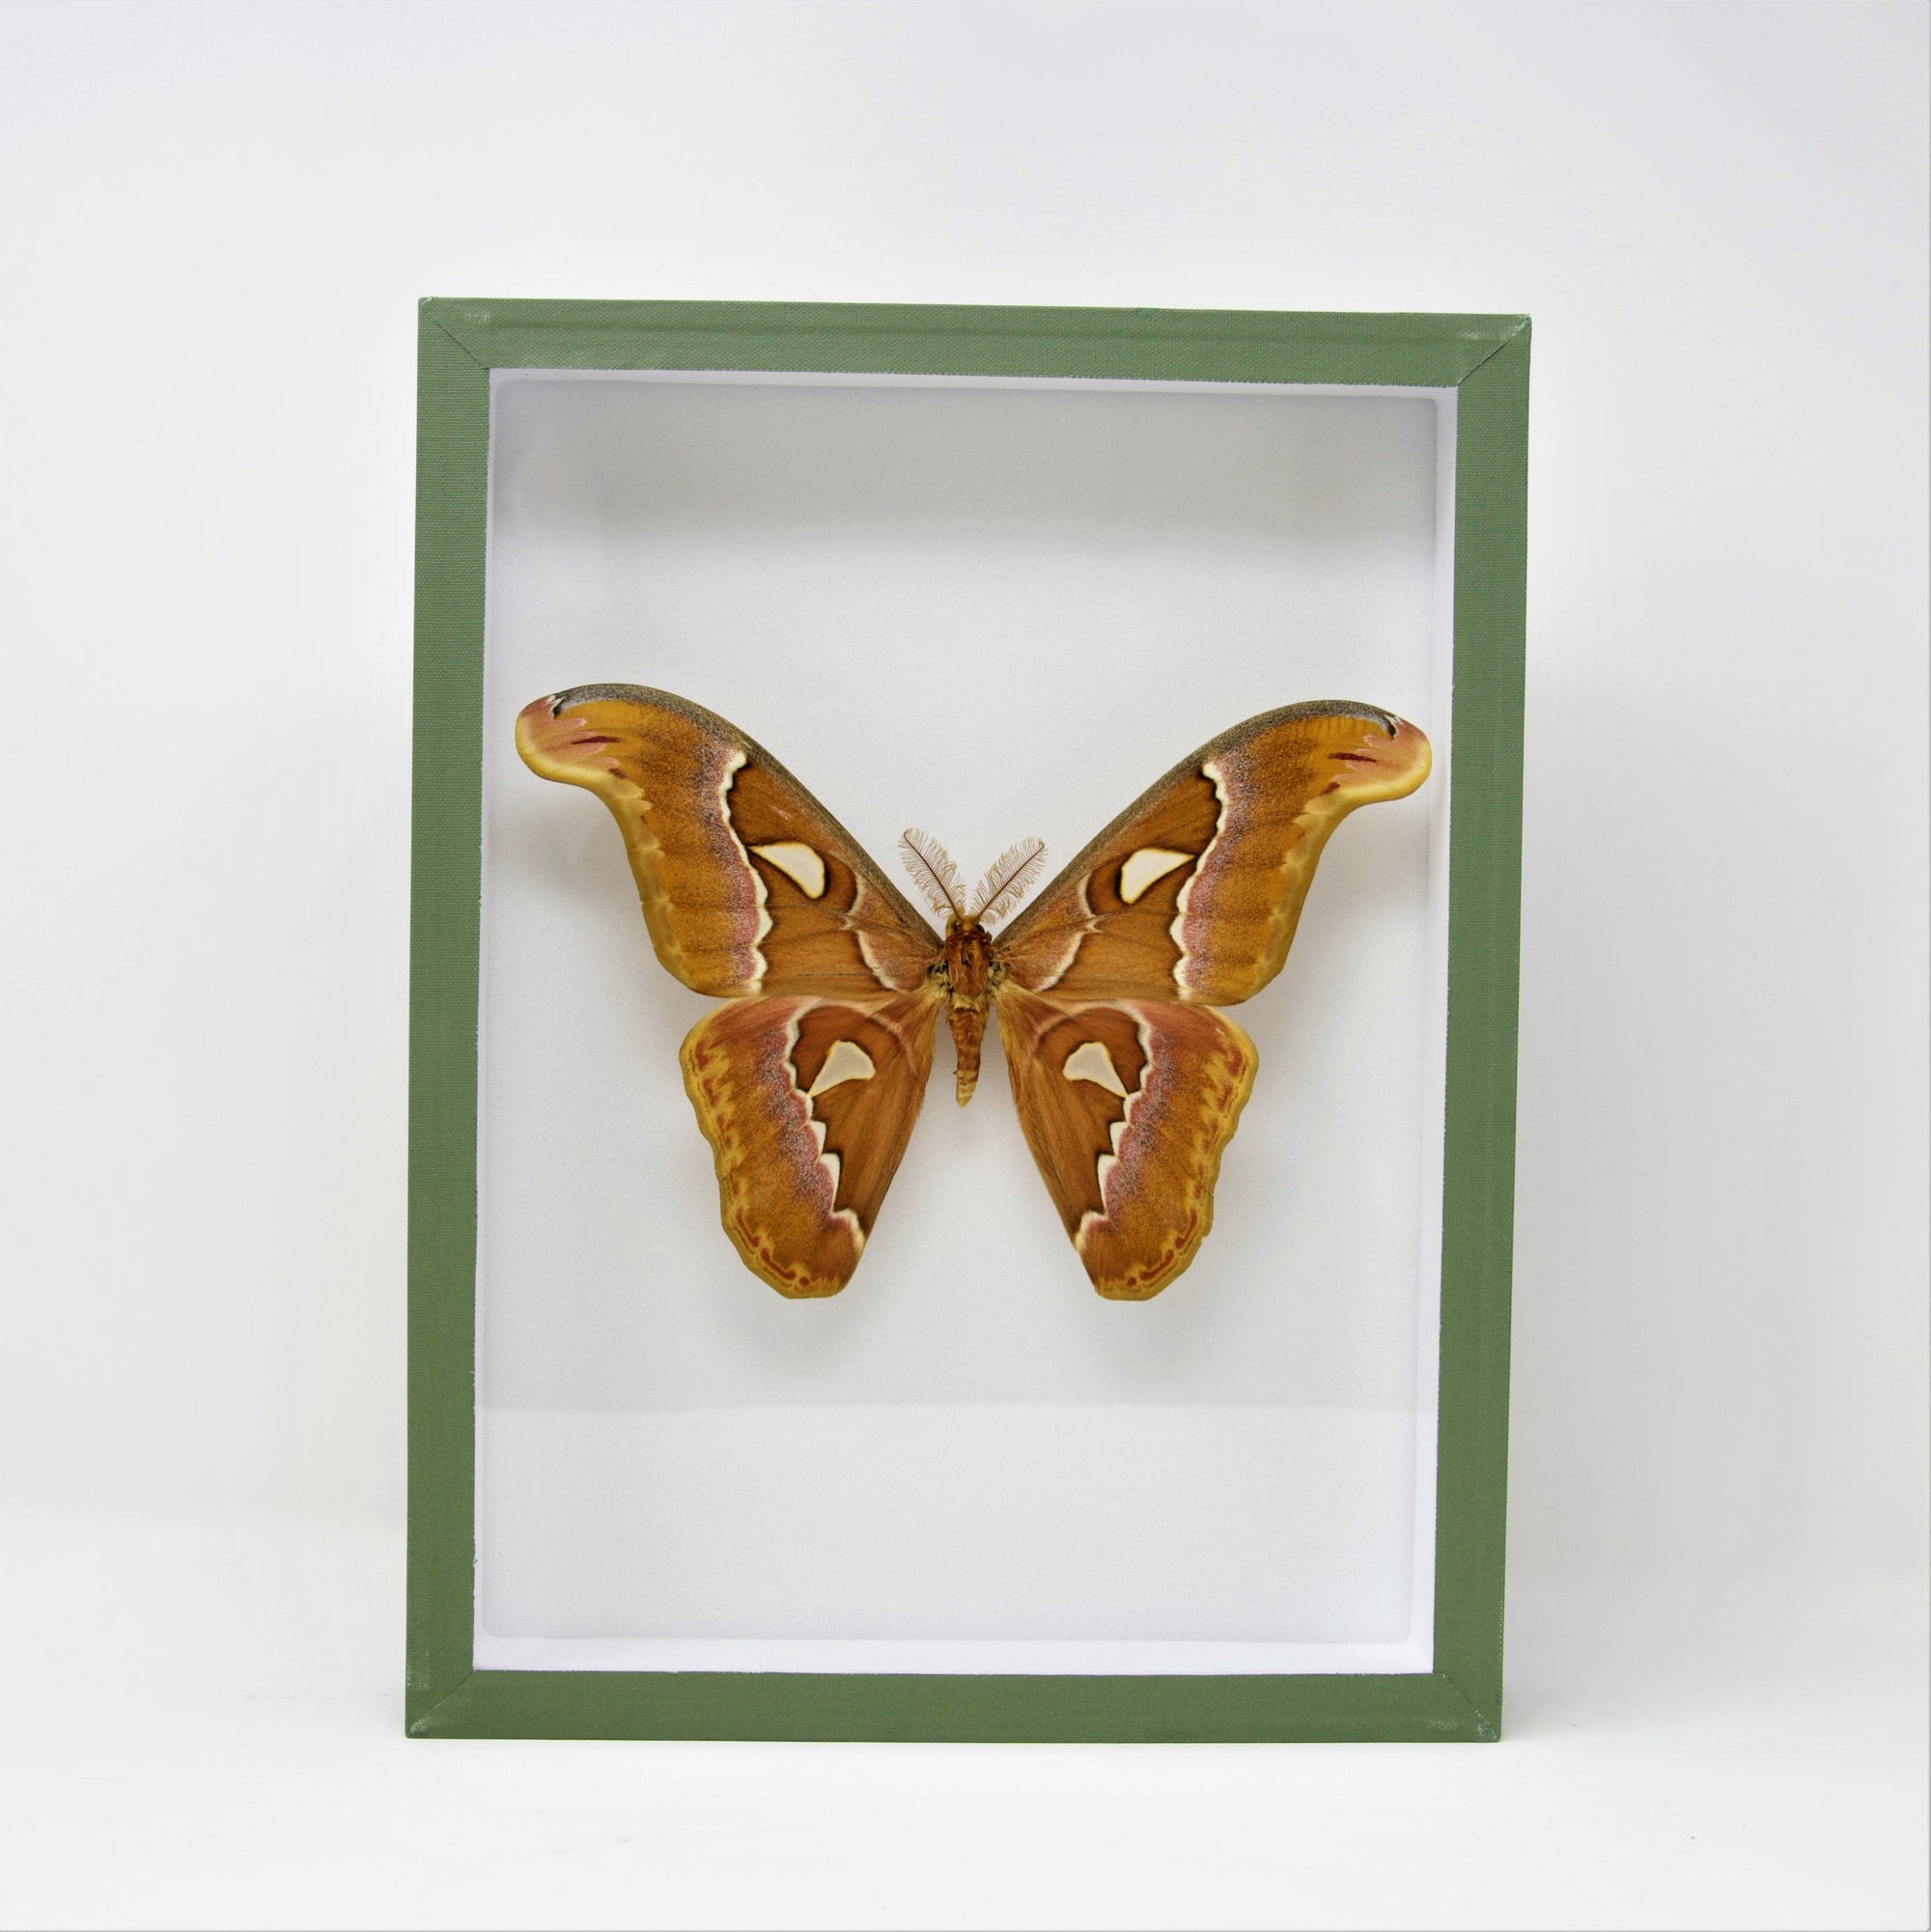 Attacus imperator | Silkmoth Pinned Specimen A1 | Mounted in Entomology Box Frame | 11.8x9x2 inch (300×230×55 mm)